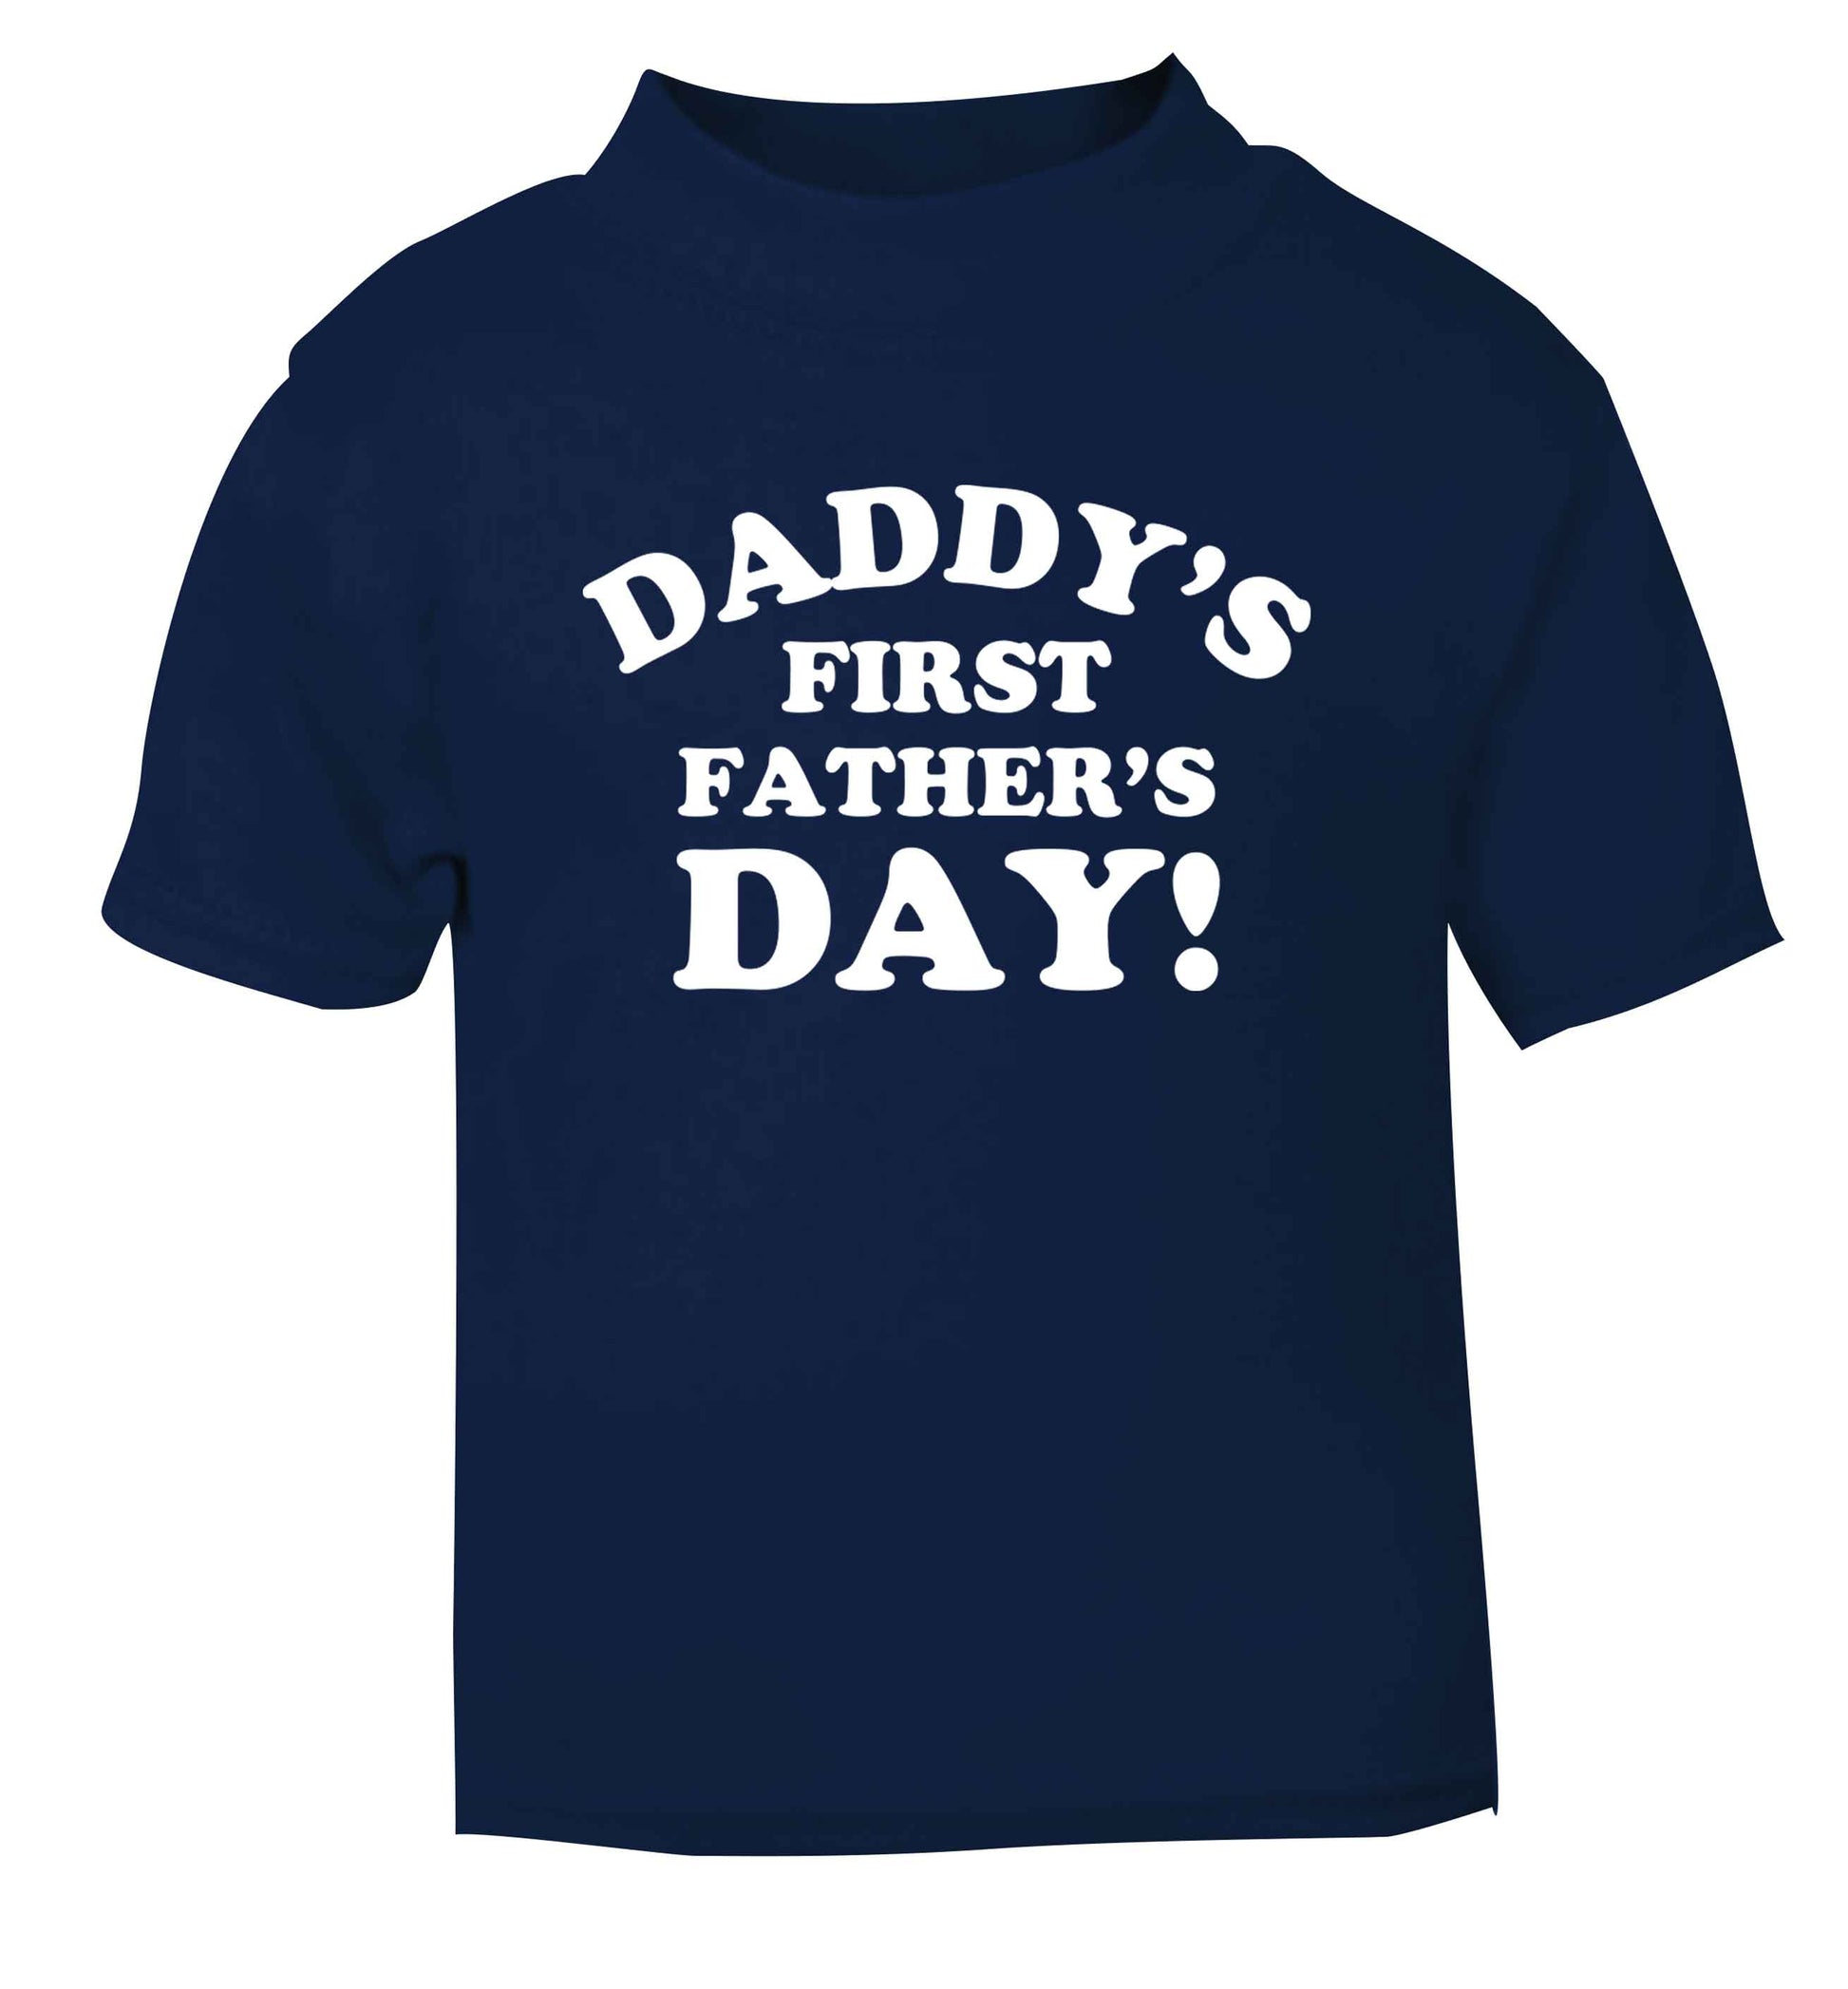 Daddy's first father's day navy baby toddler Tshirt 2 Years